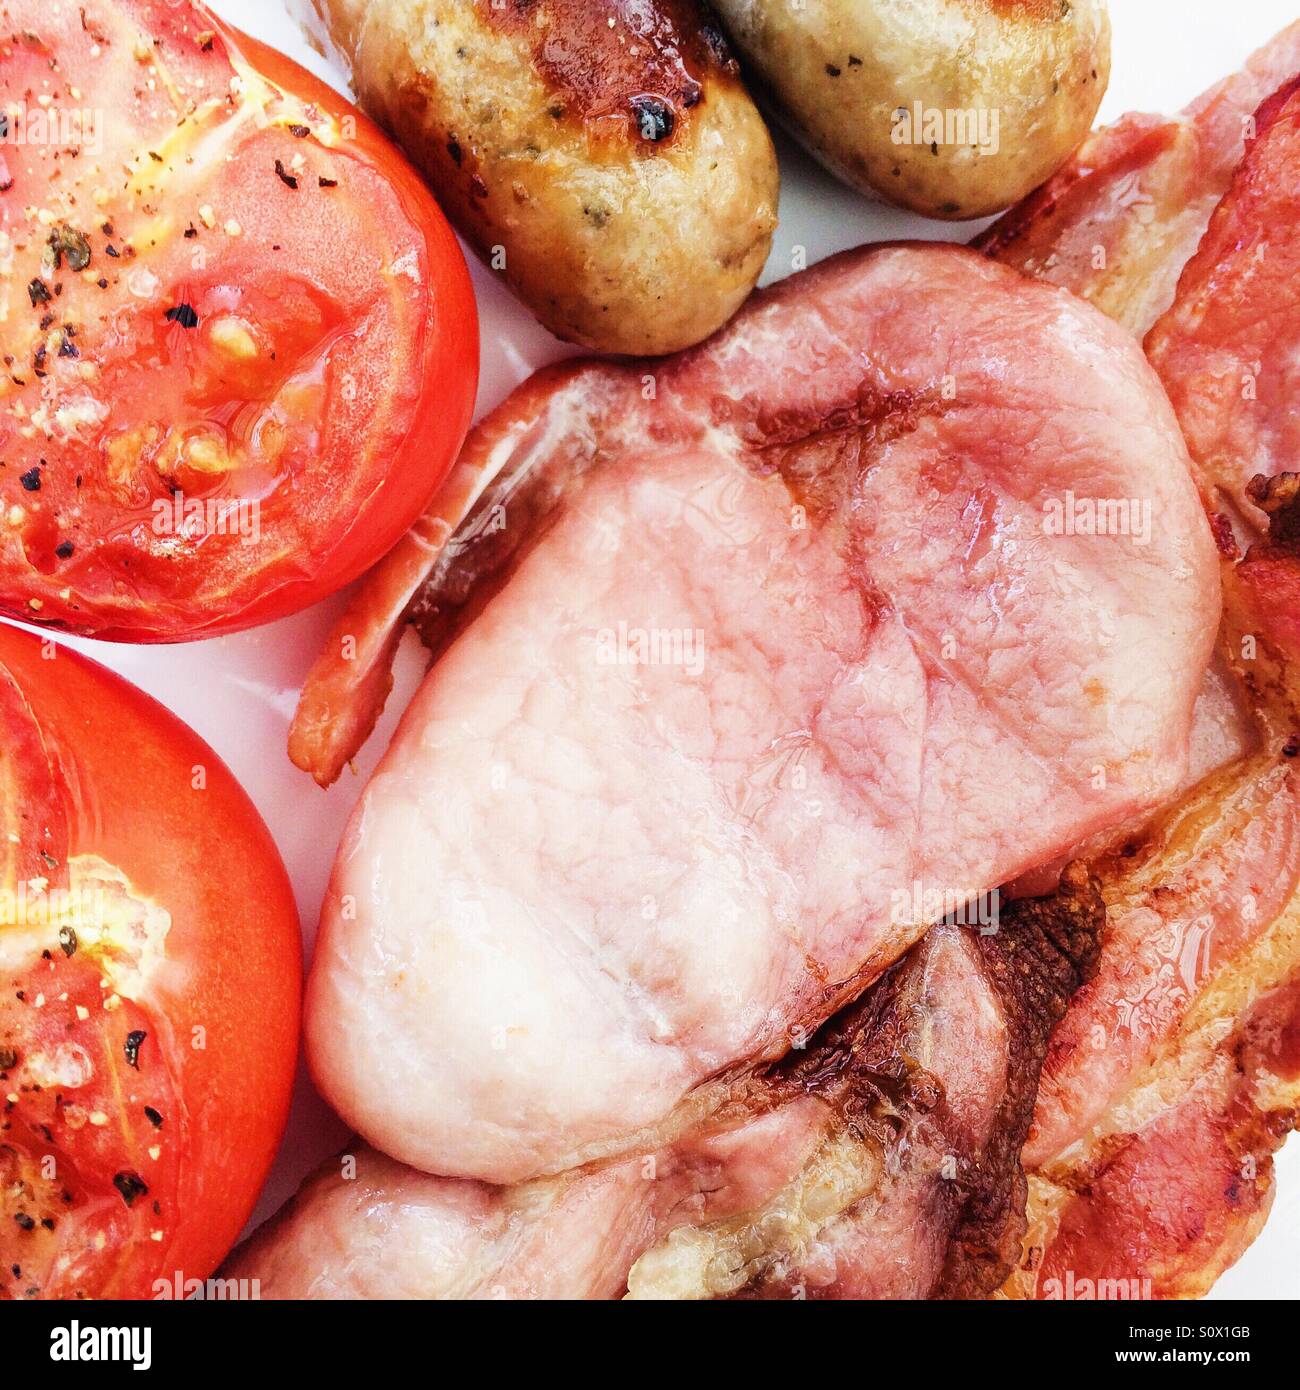 Bacon sausage and tomato breakfast Stock Photo